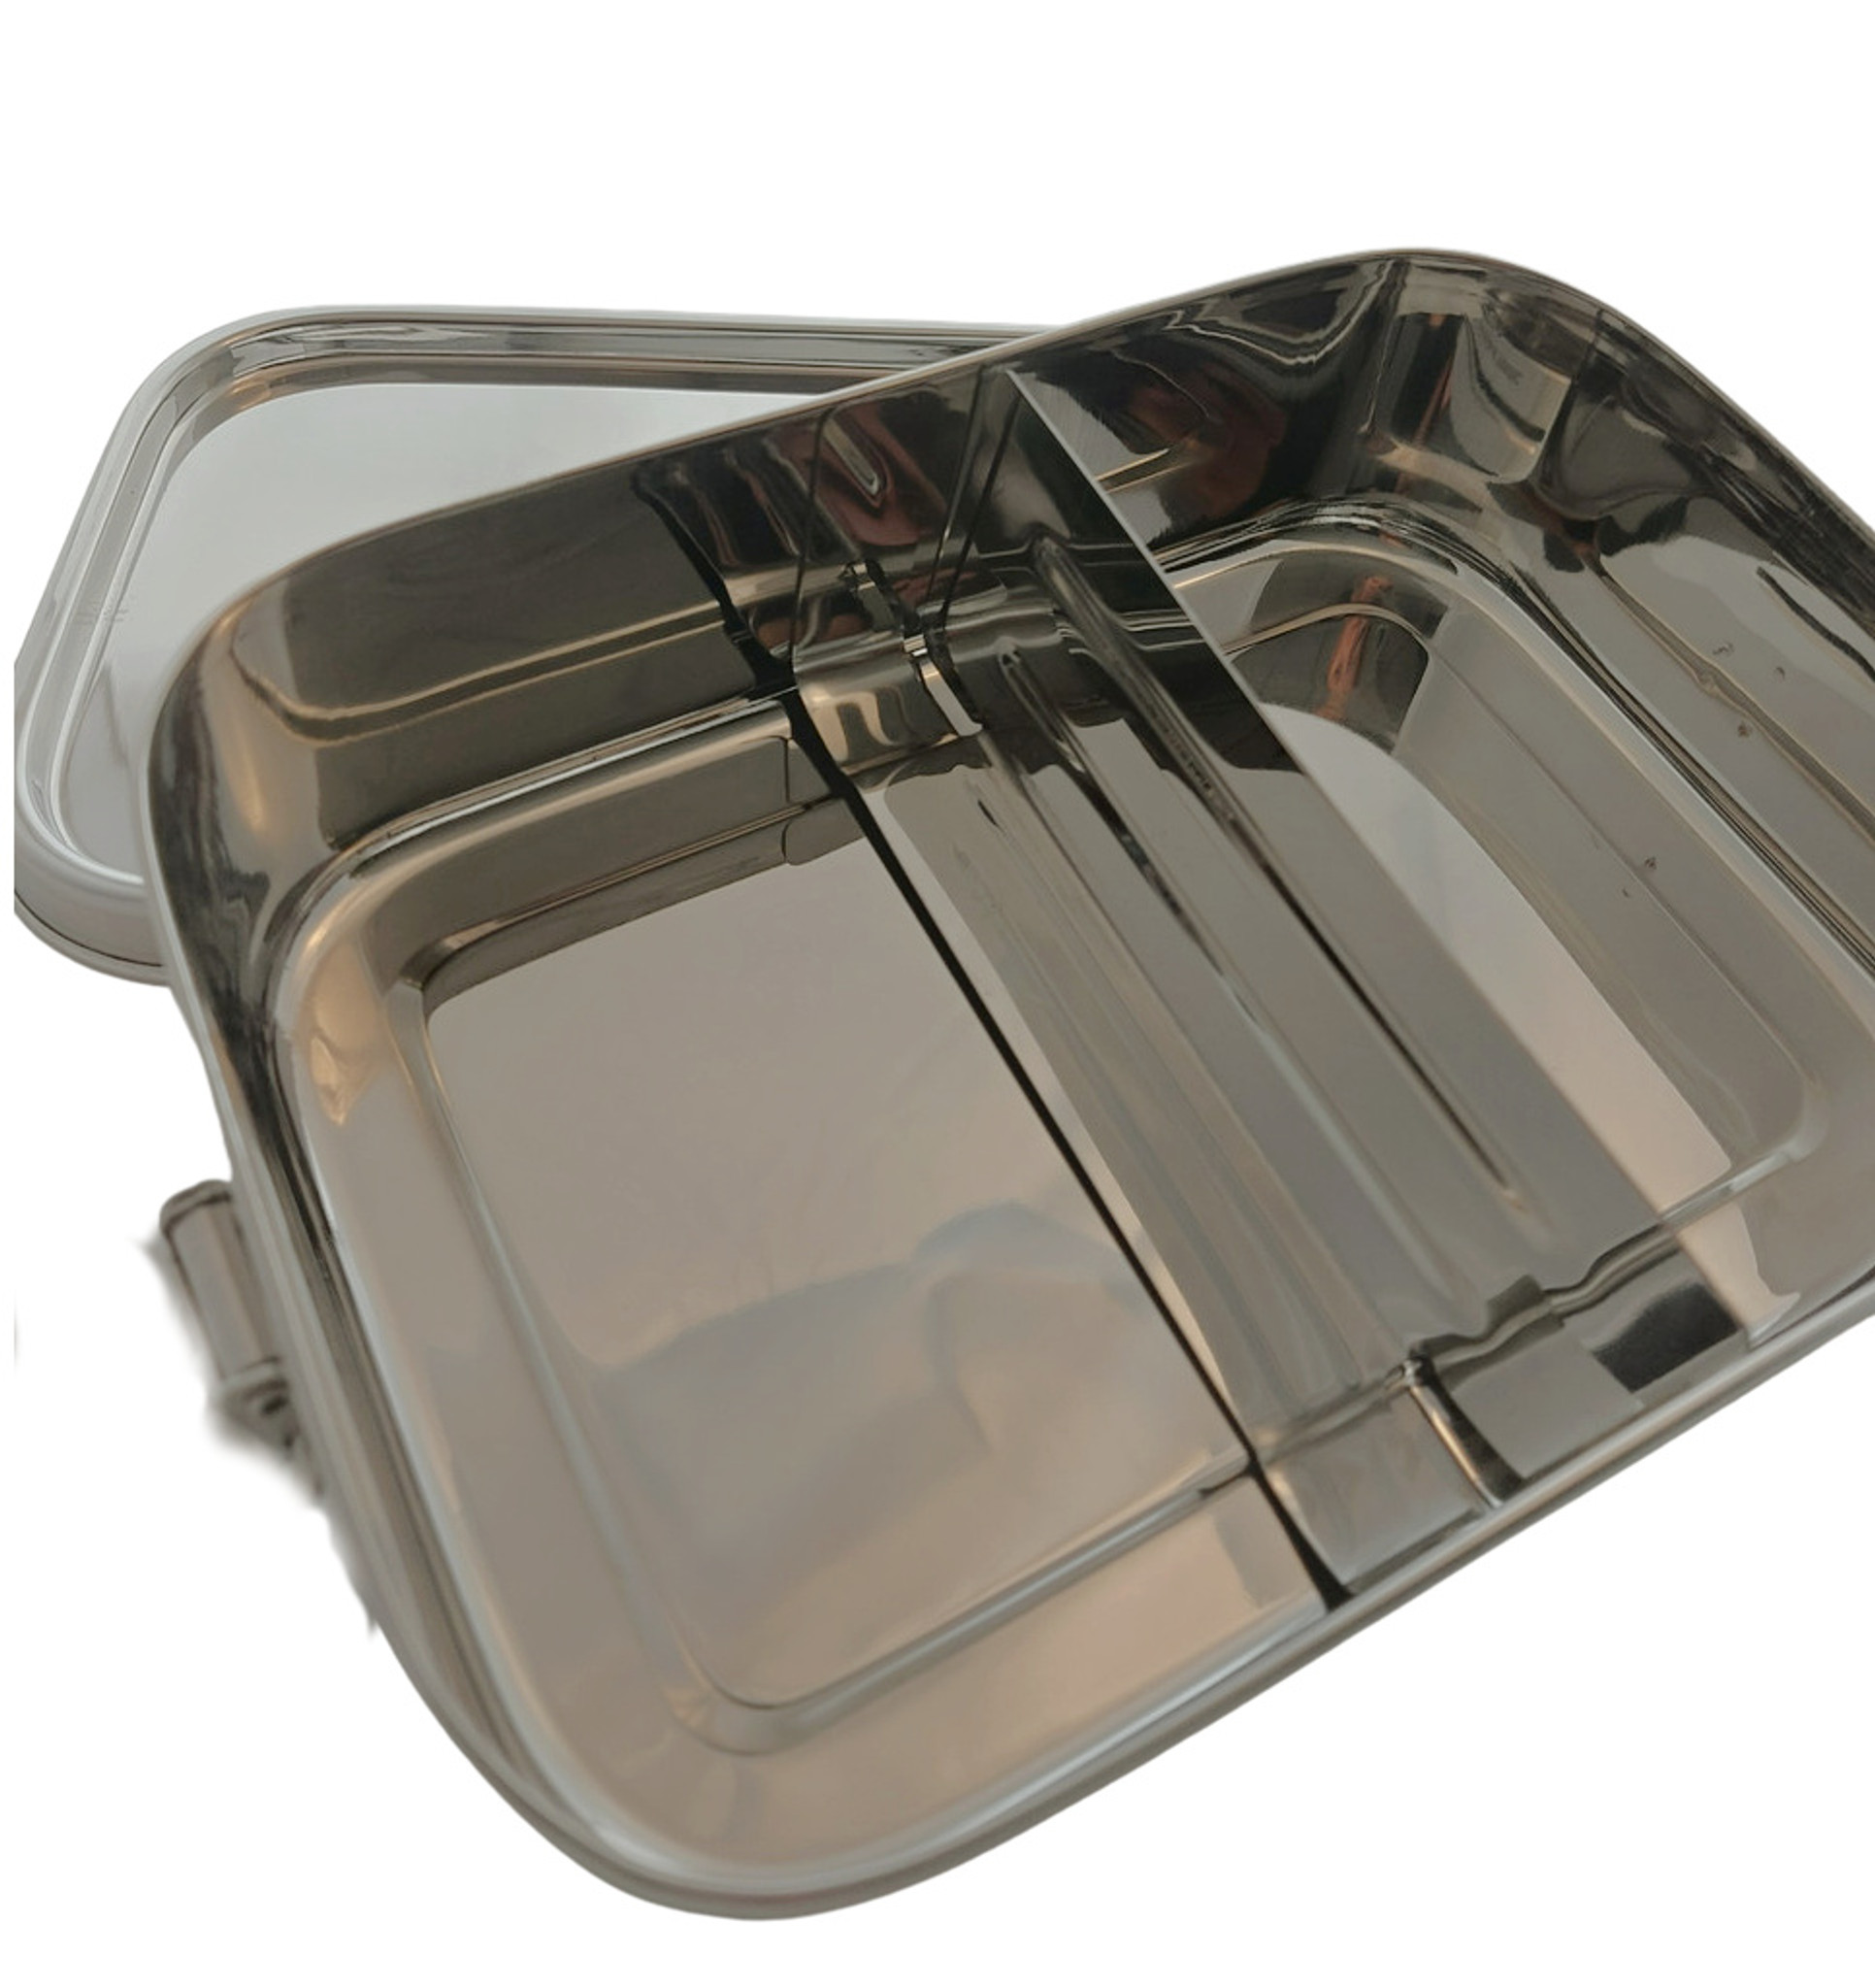 Removable divider for rectangular stainless steel container